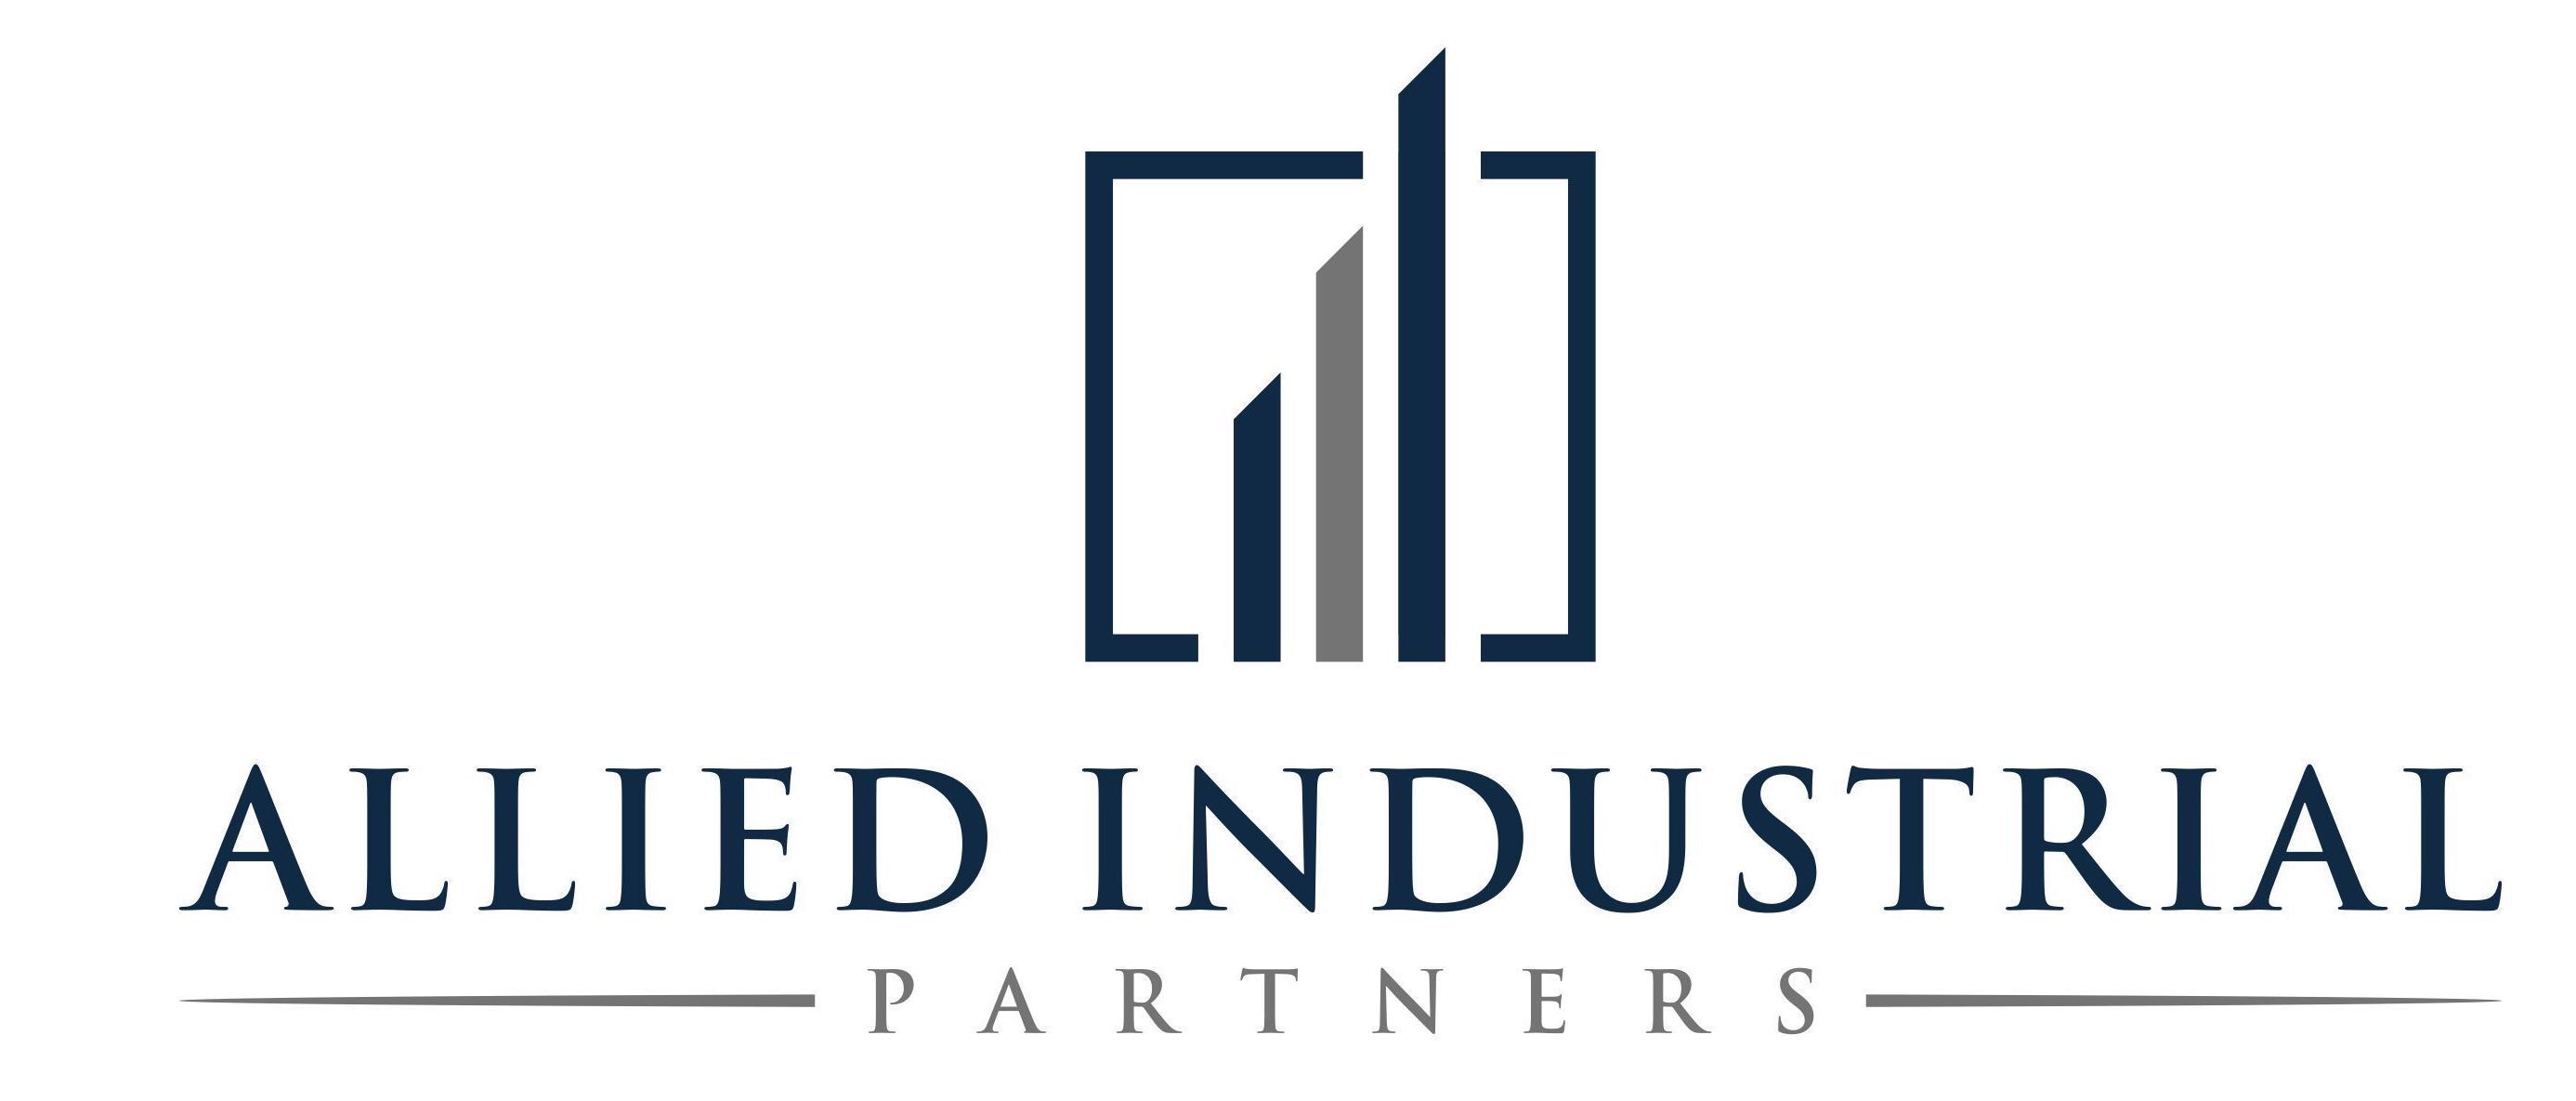 Allied Industrial Partners